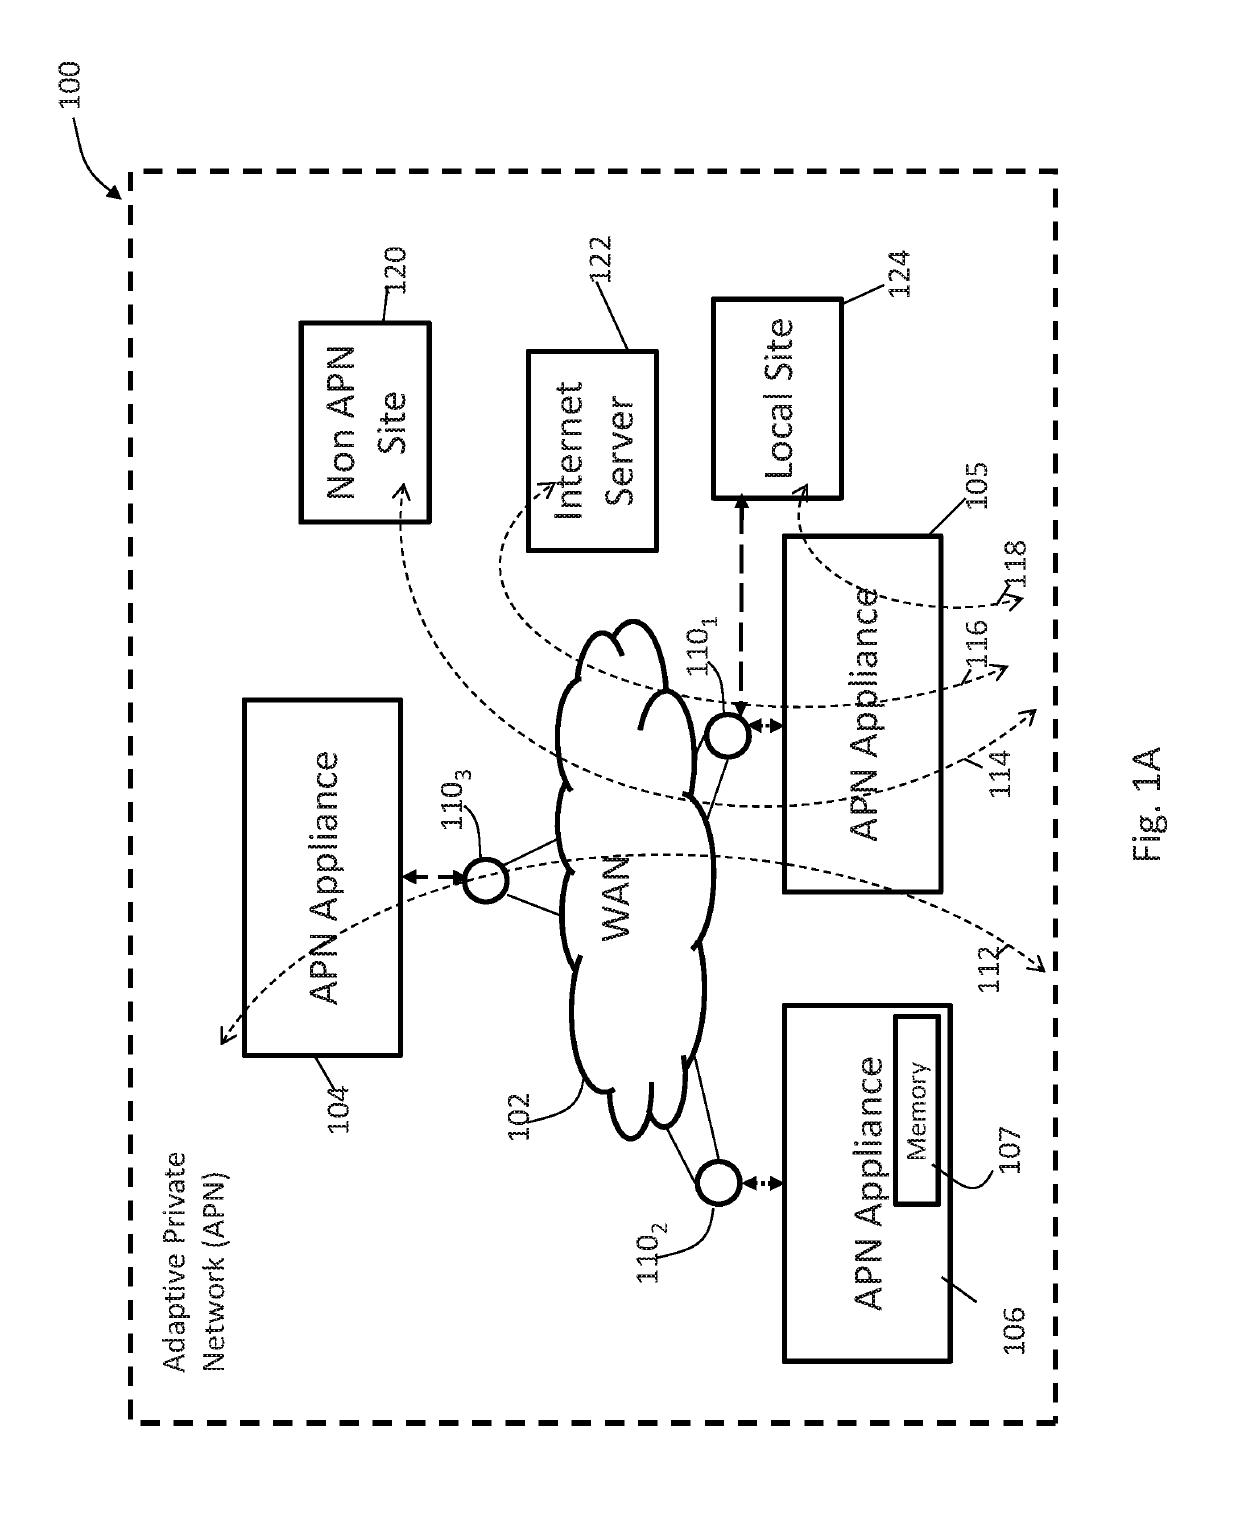 Methods and apparatus for providing adaptive private network centralized management system time correlated playback of network traffic